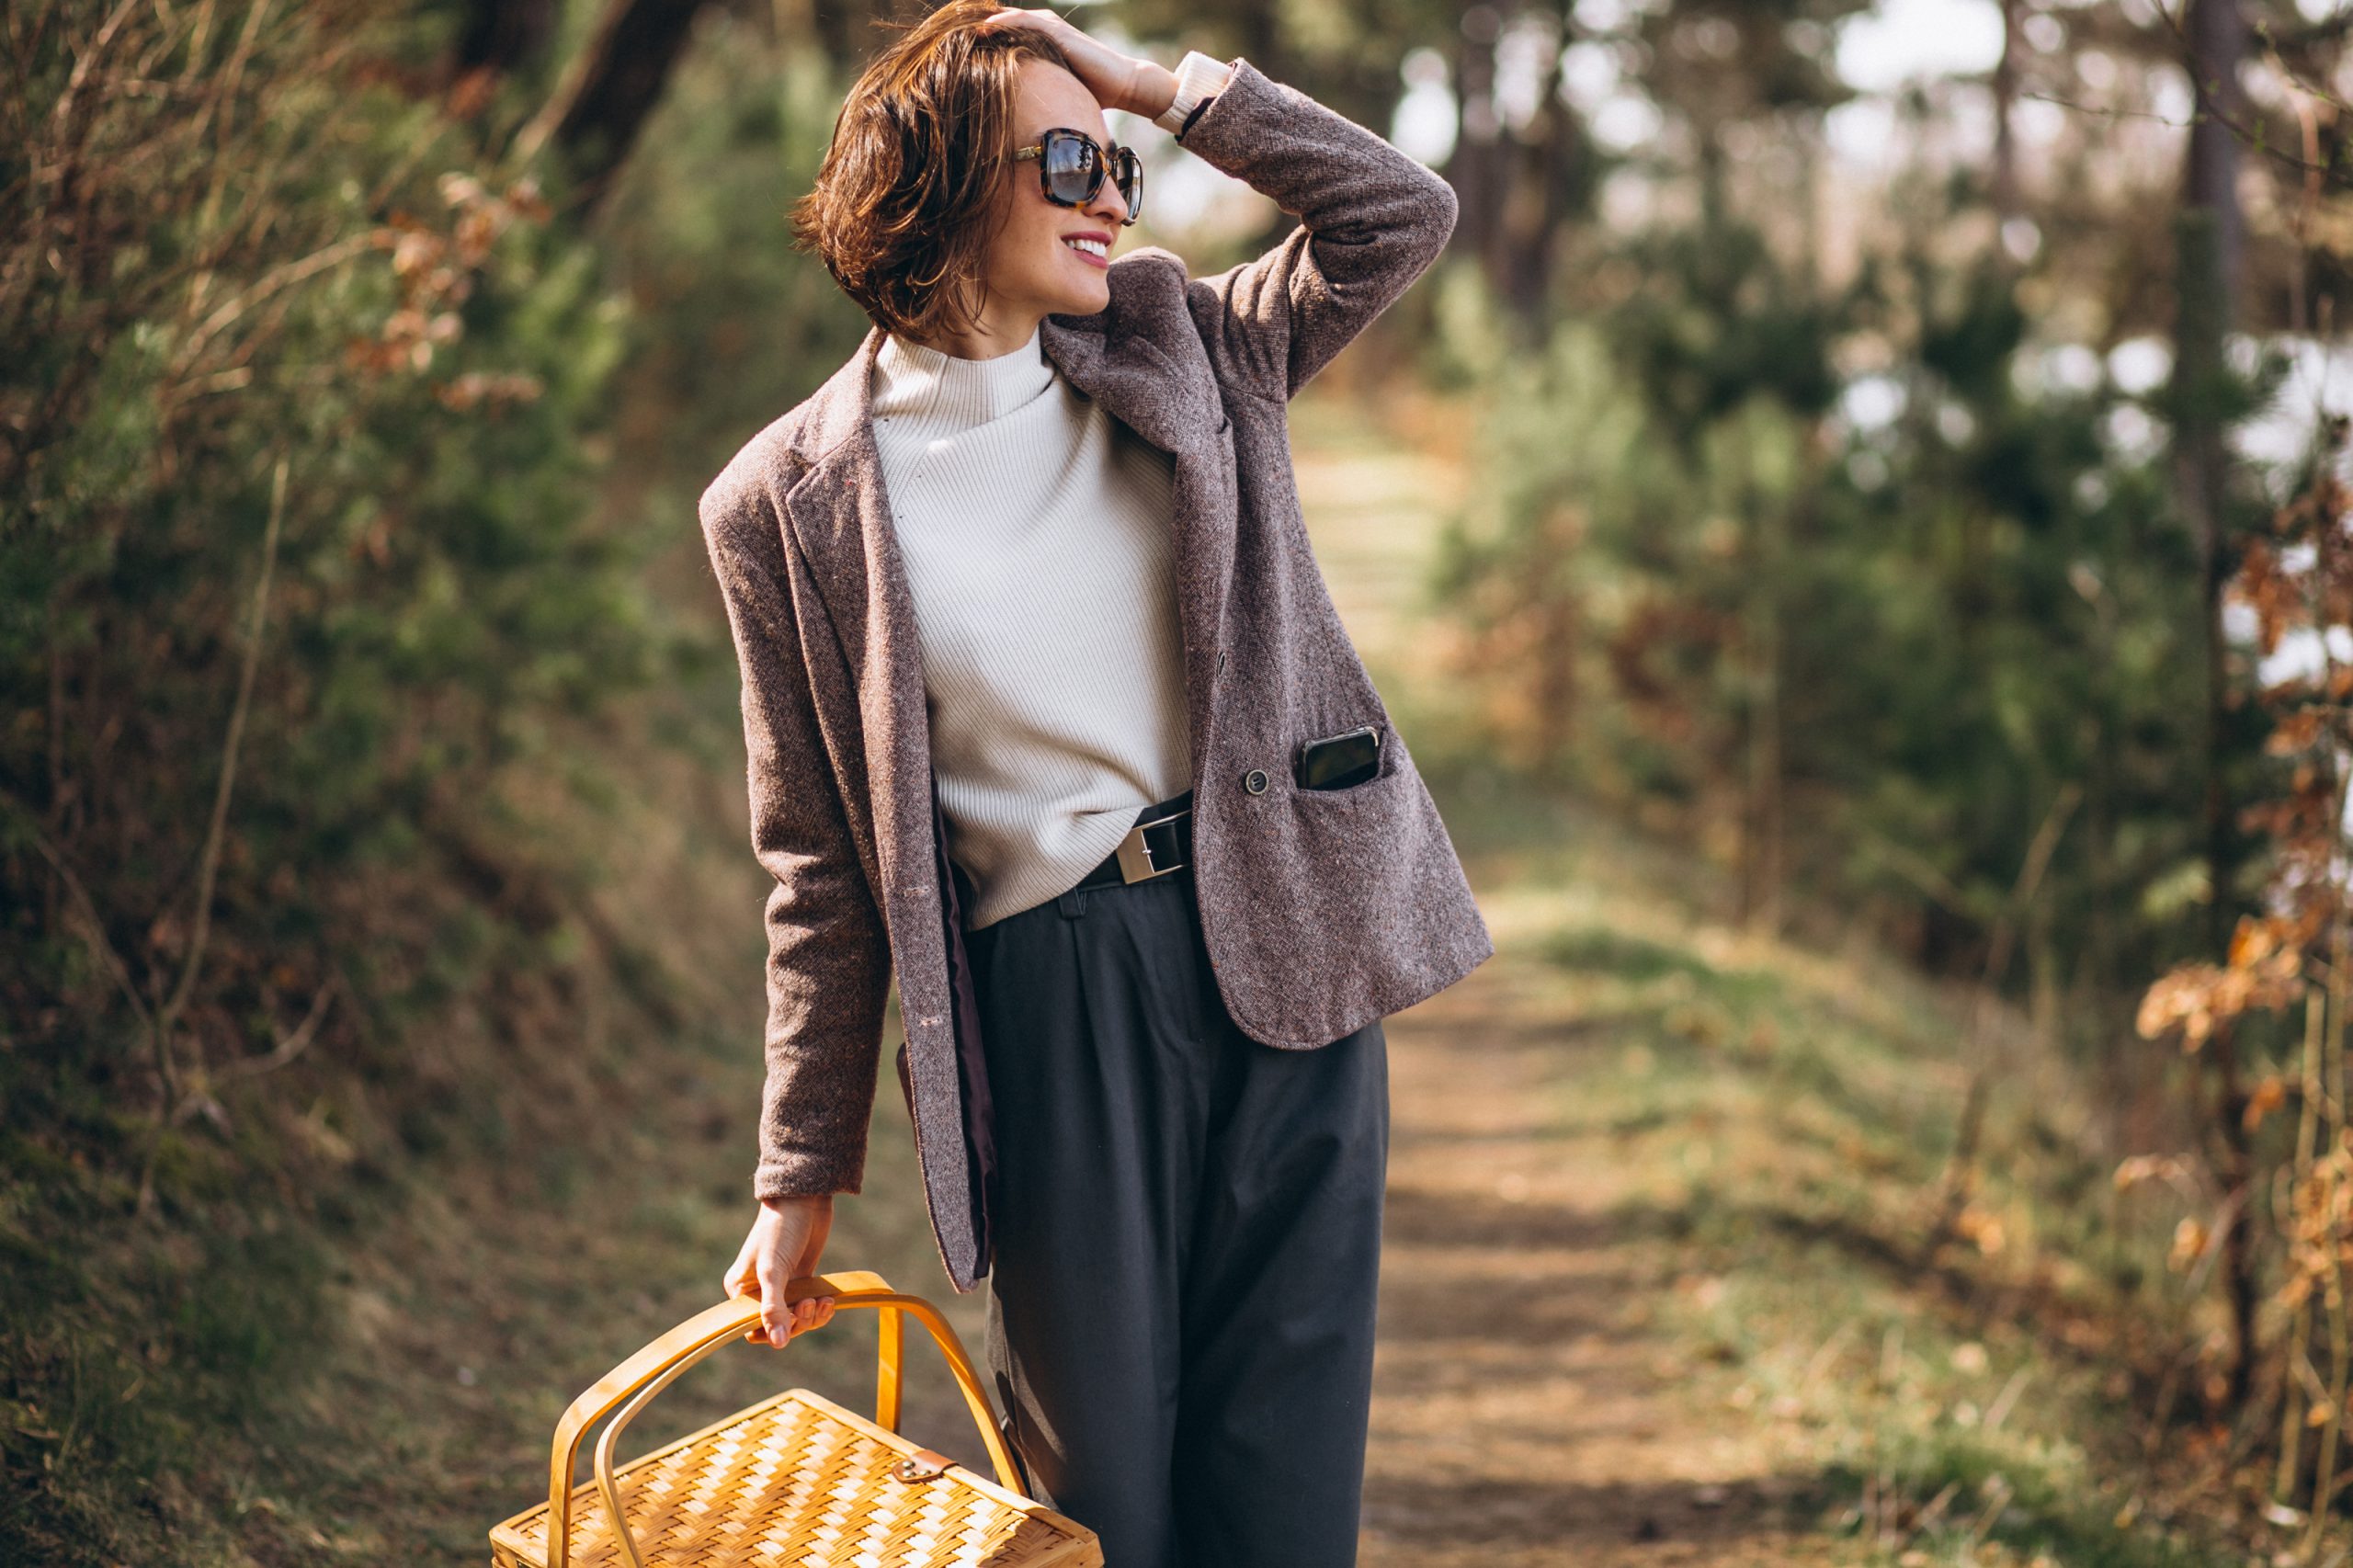 Fall Clothing Checklist: 4 Trendy, Mix-n-Match Pieces You Need